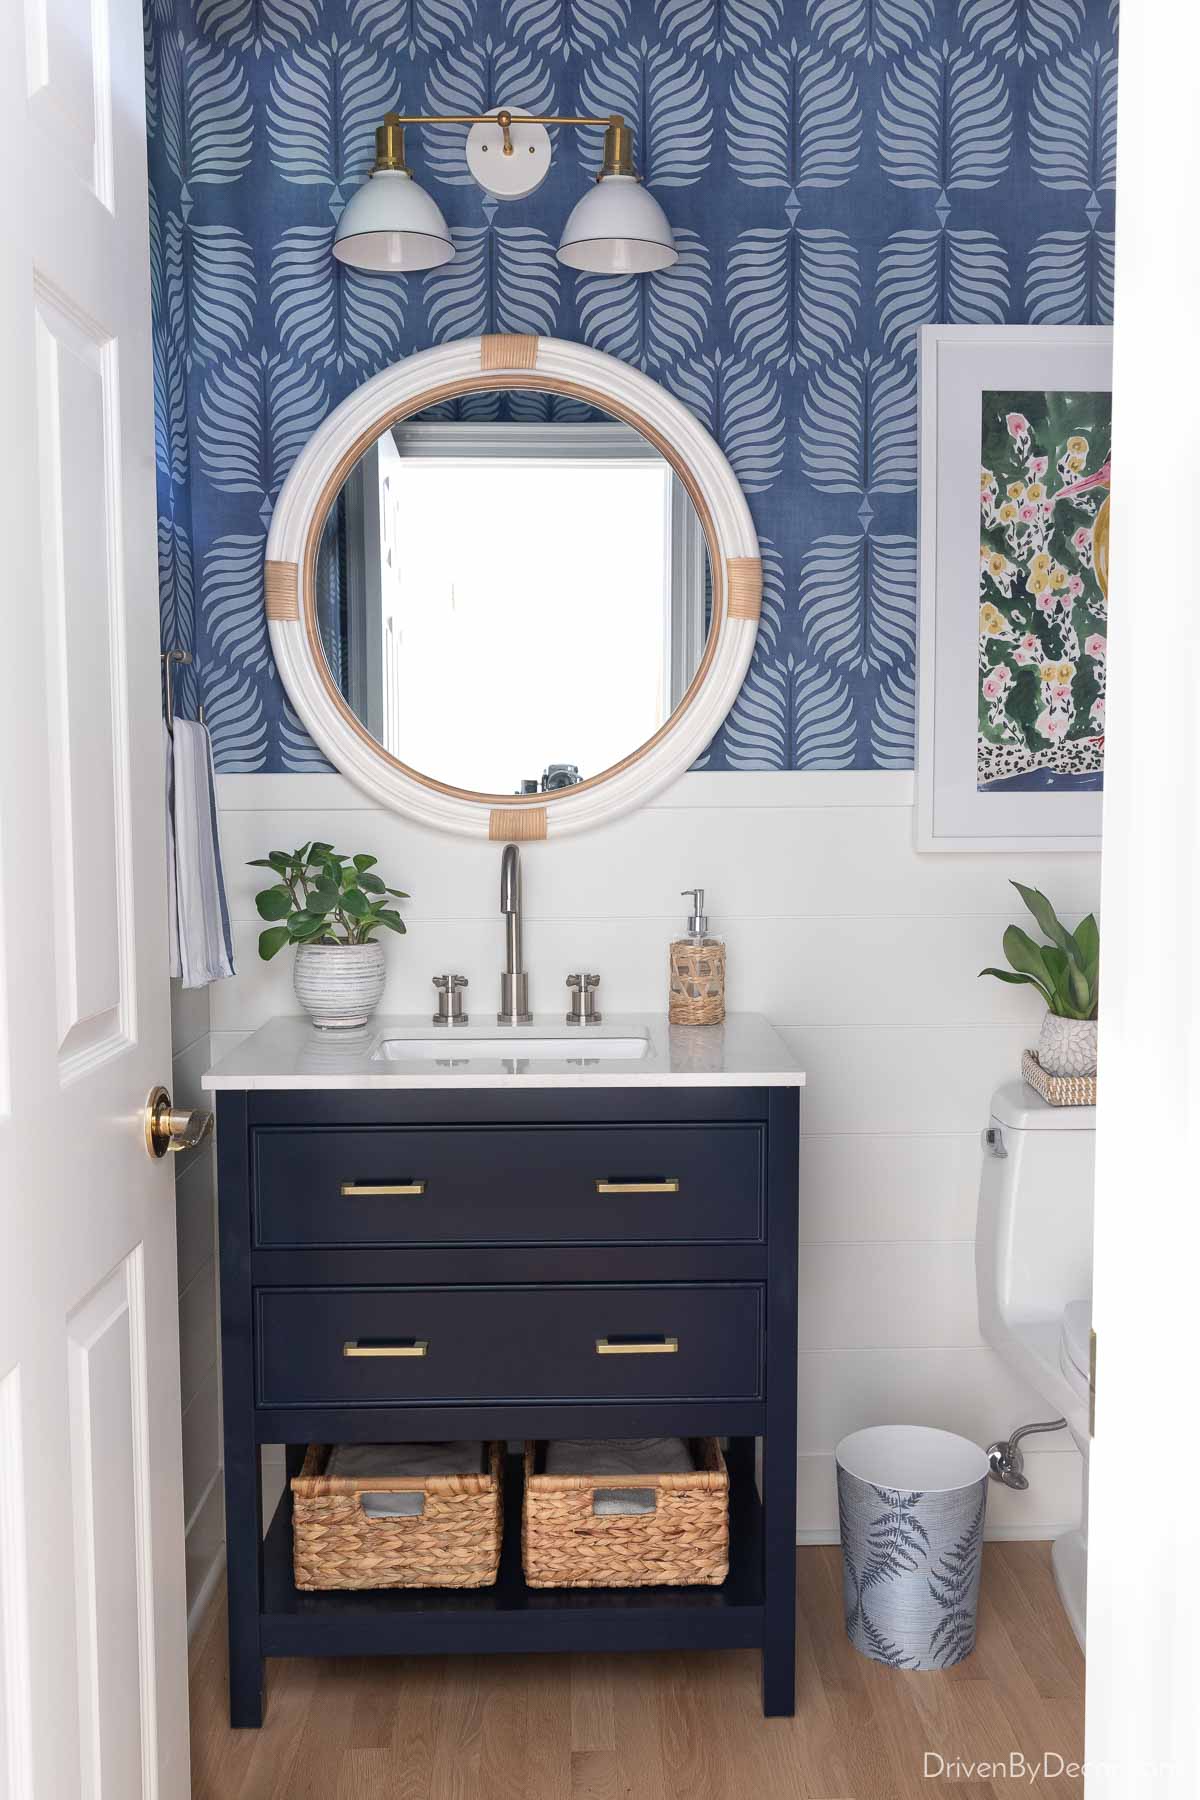 Our remodeled hall bathroom with shiplap walls and blue accents